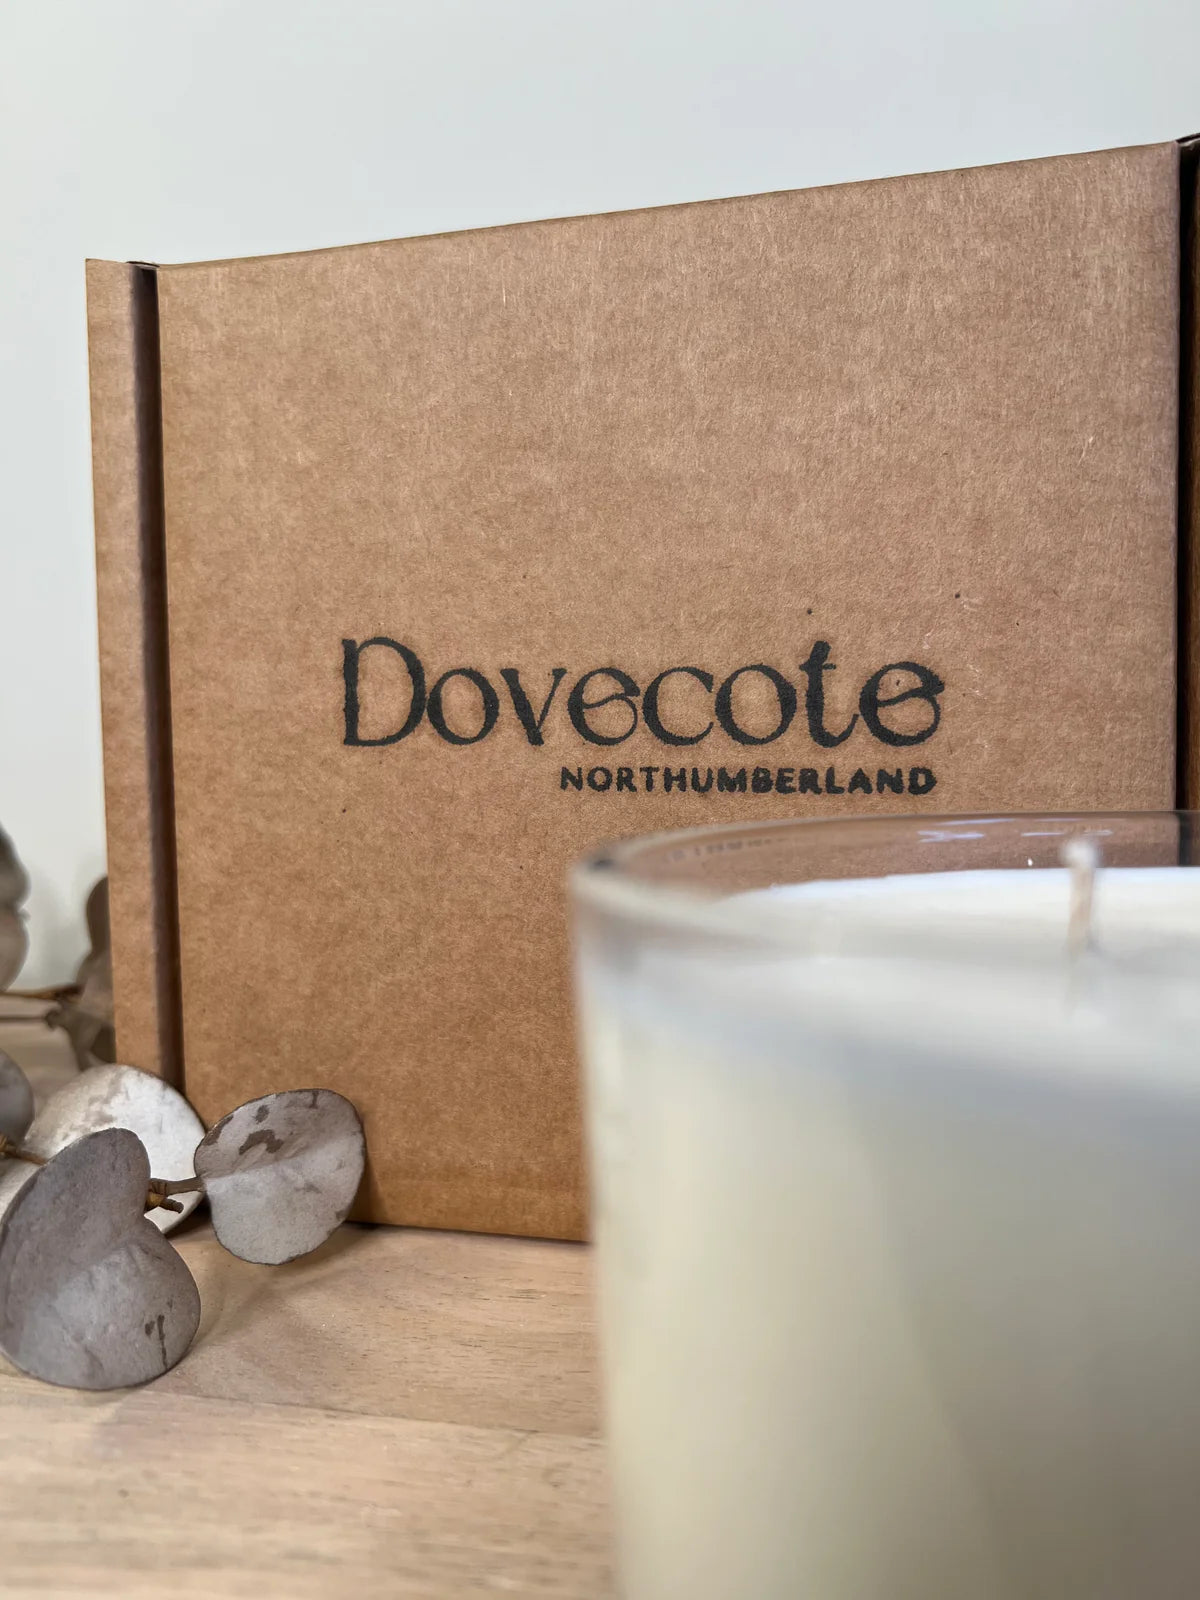 Dovecote 3 Wick Fragranced Candle